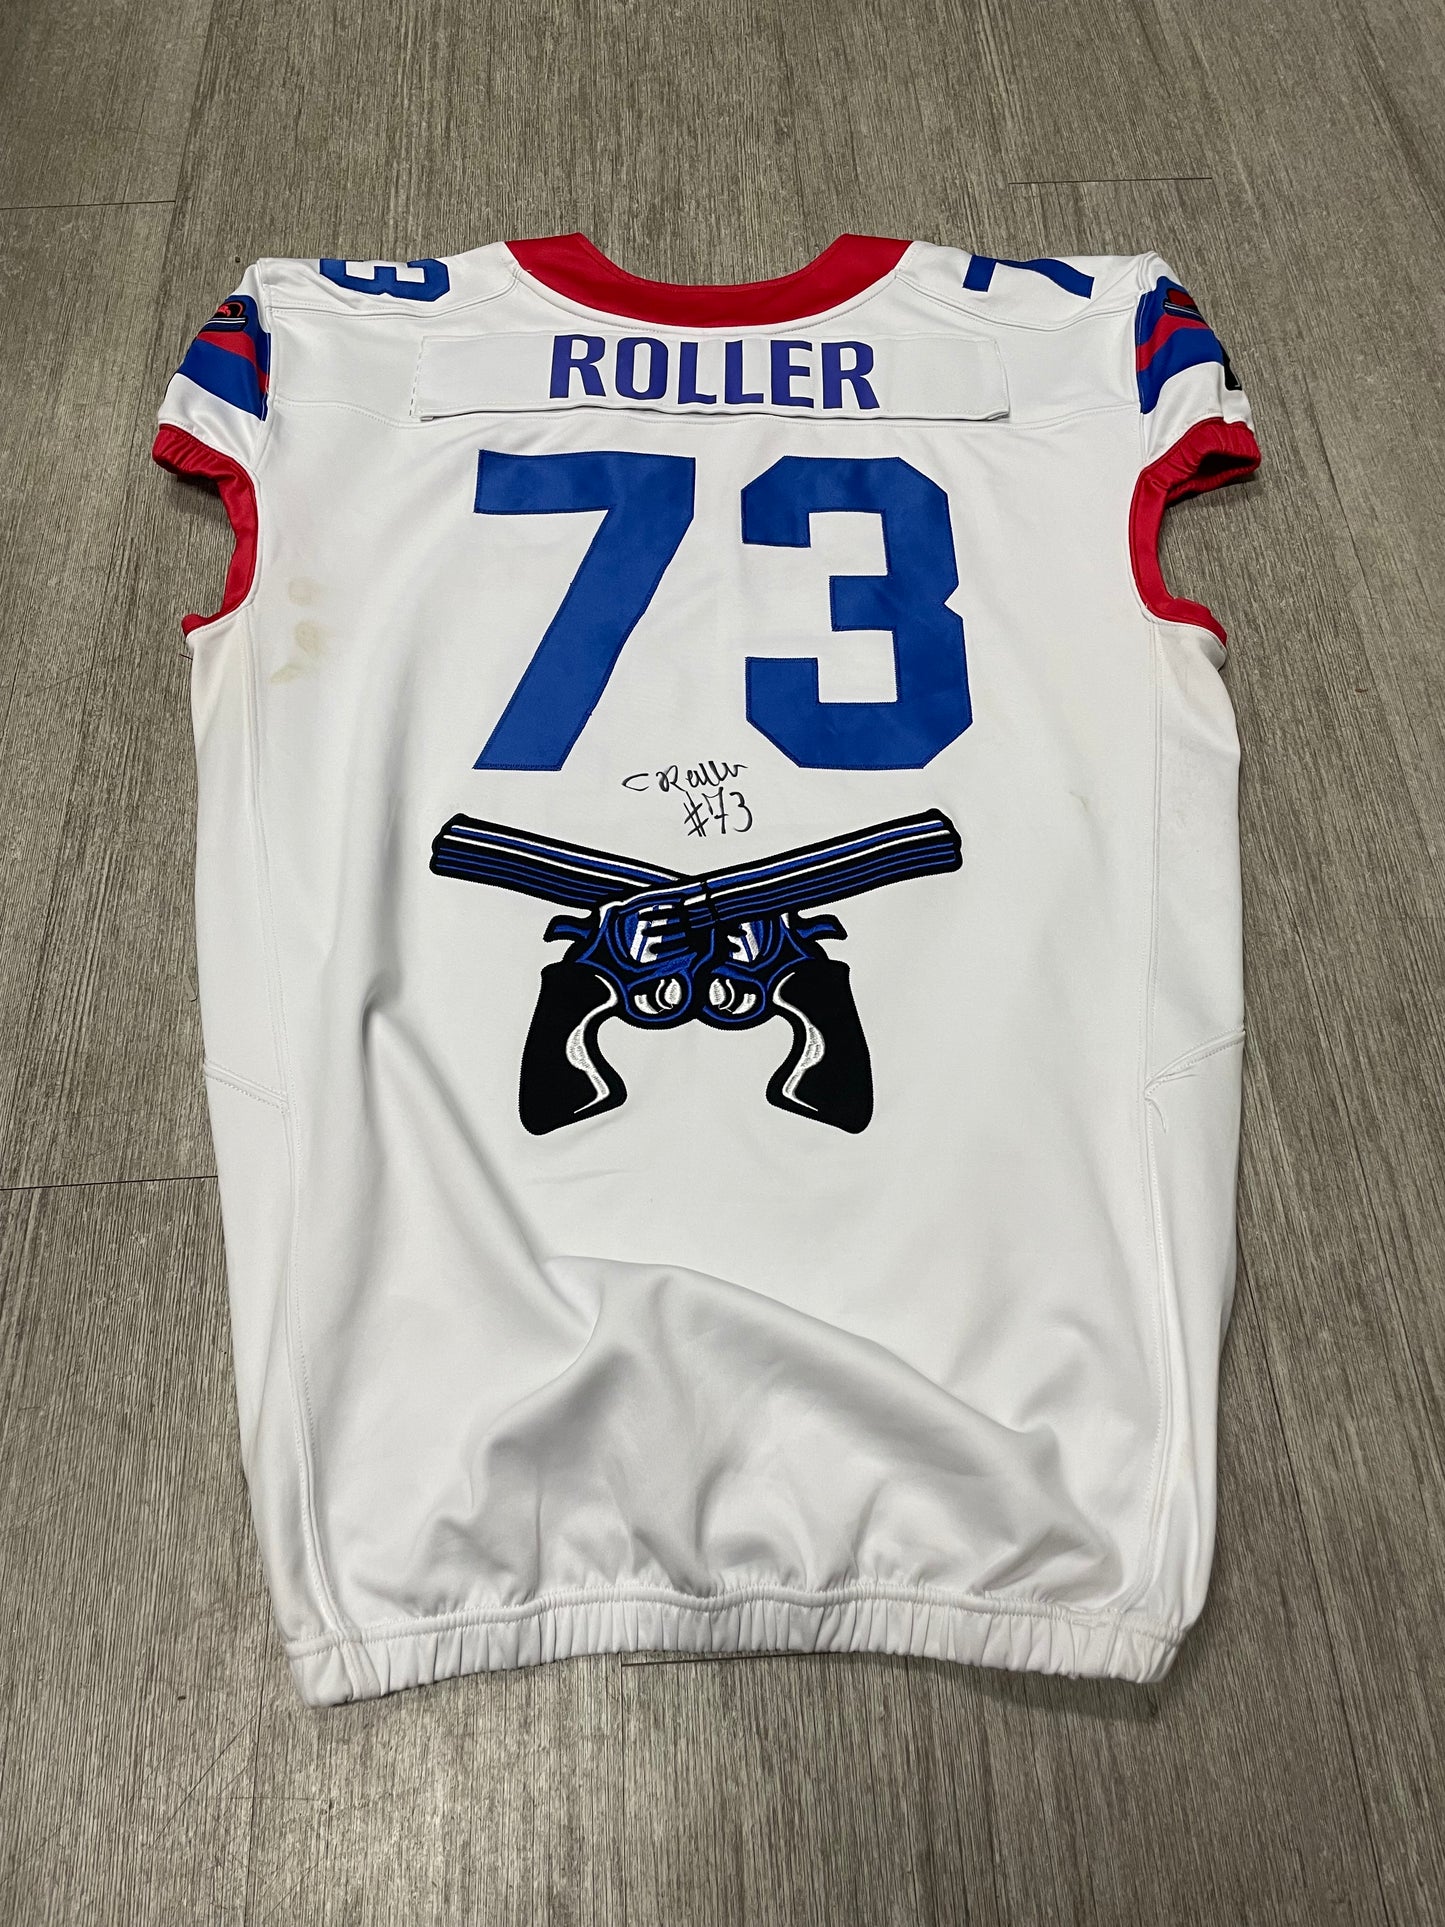 #73 Caleb Roller - Signed 2023 White Jersey